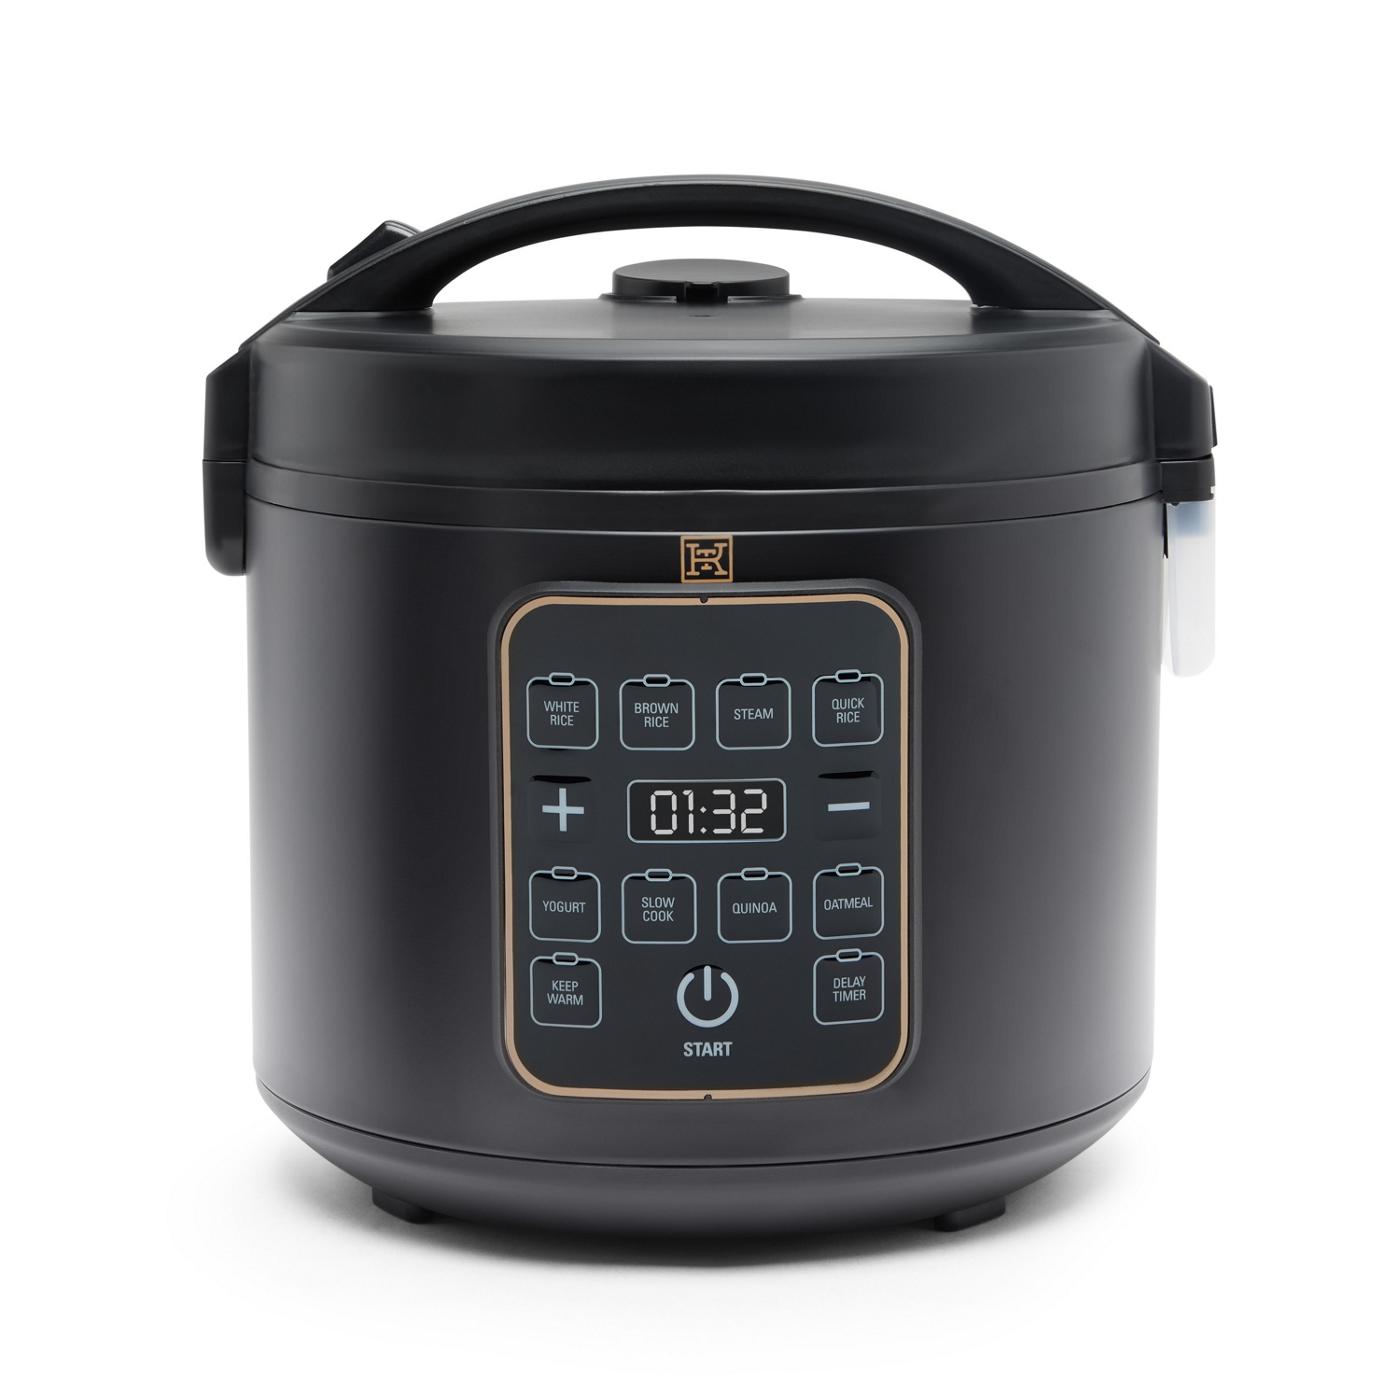 Steam Rice Cookers